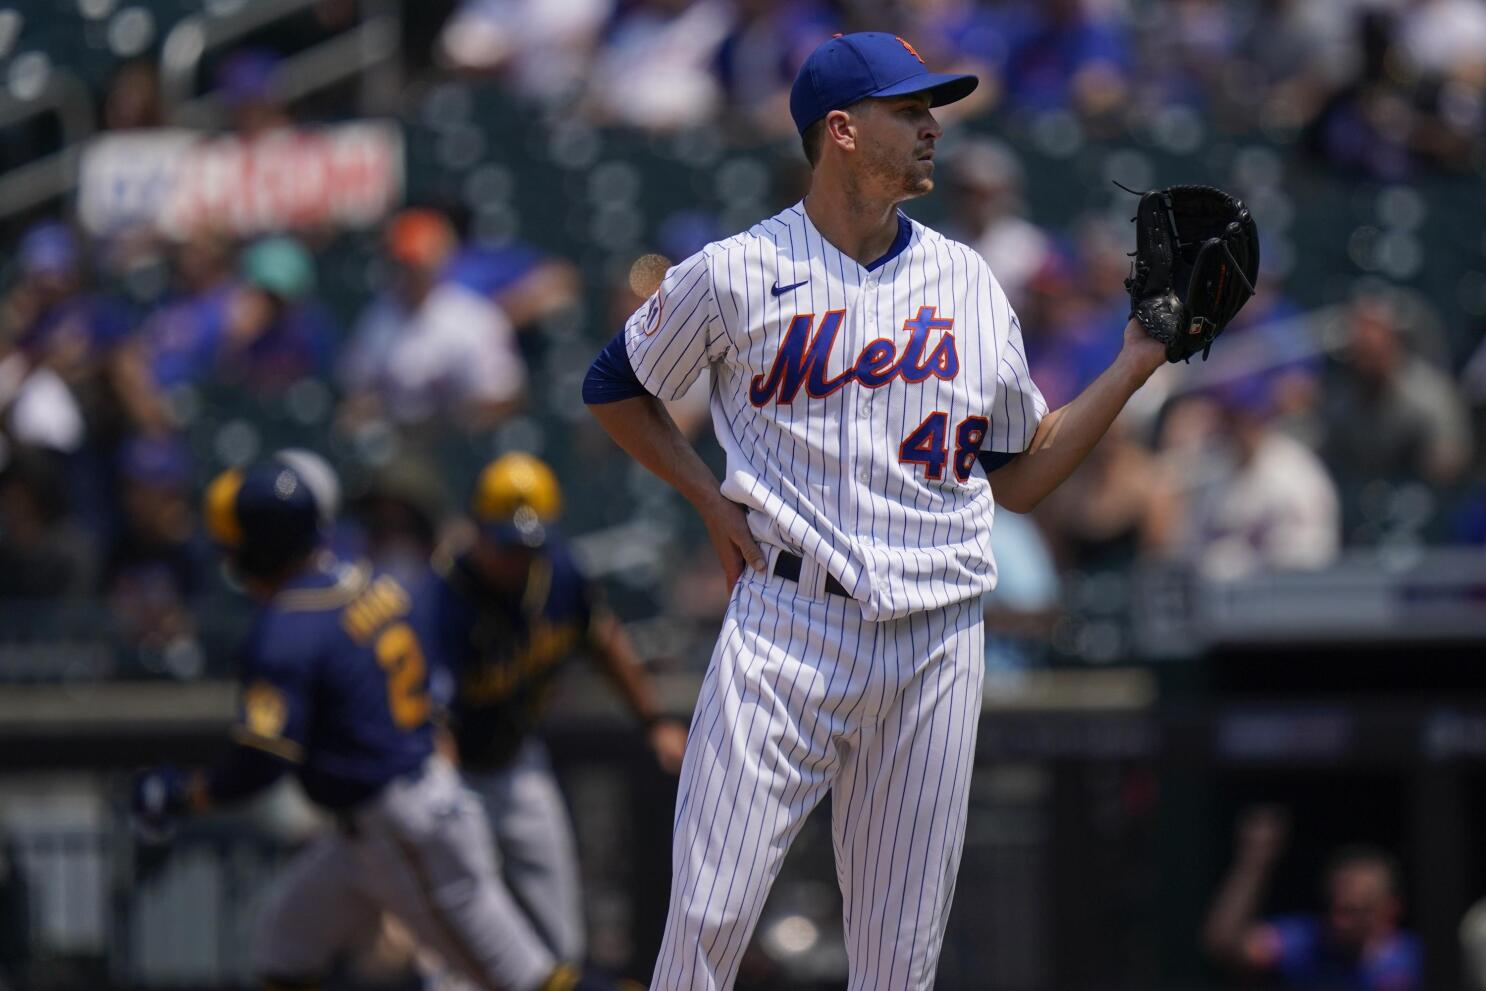 New York Mets ace Jacob deGrom finishes with 1.70 ERA